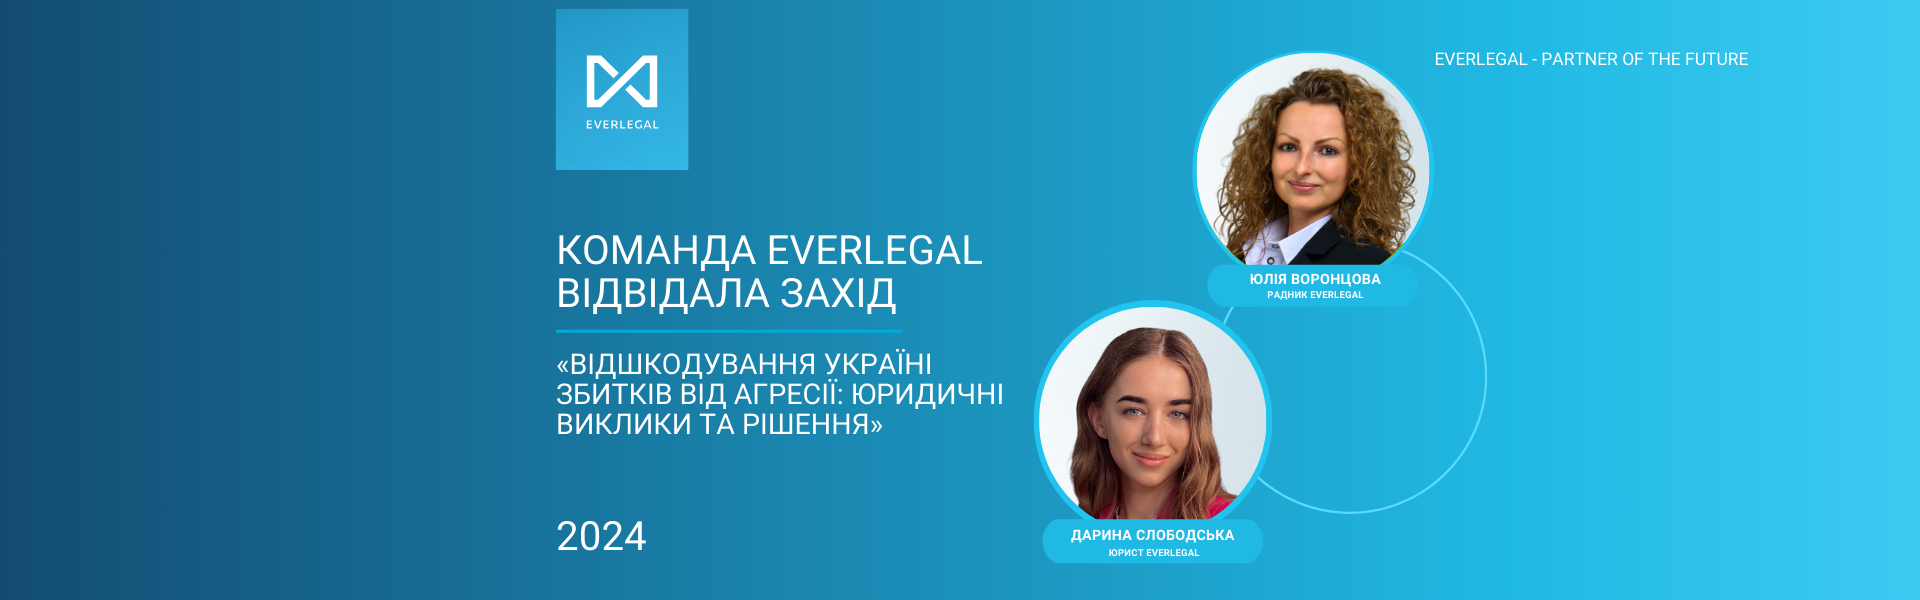 EVERLEGAL team attended the event 